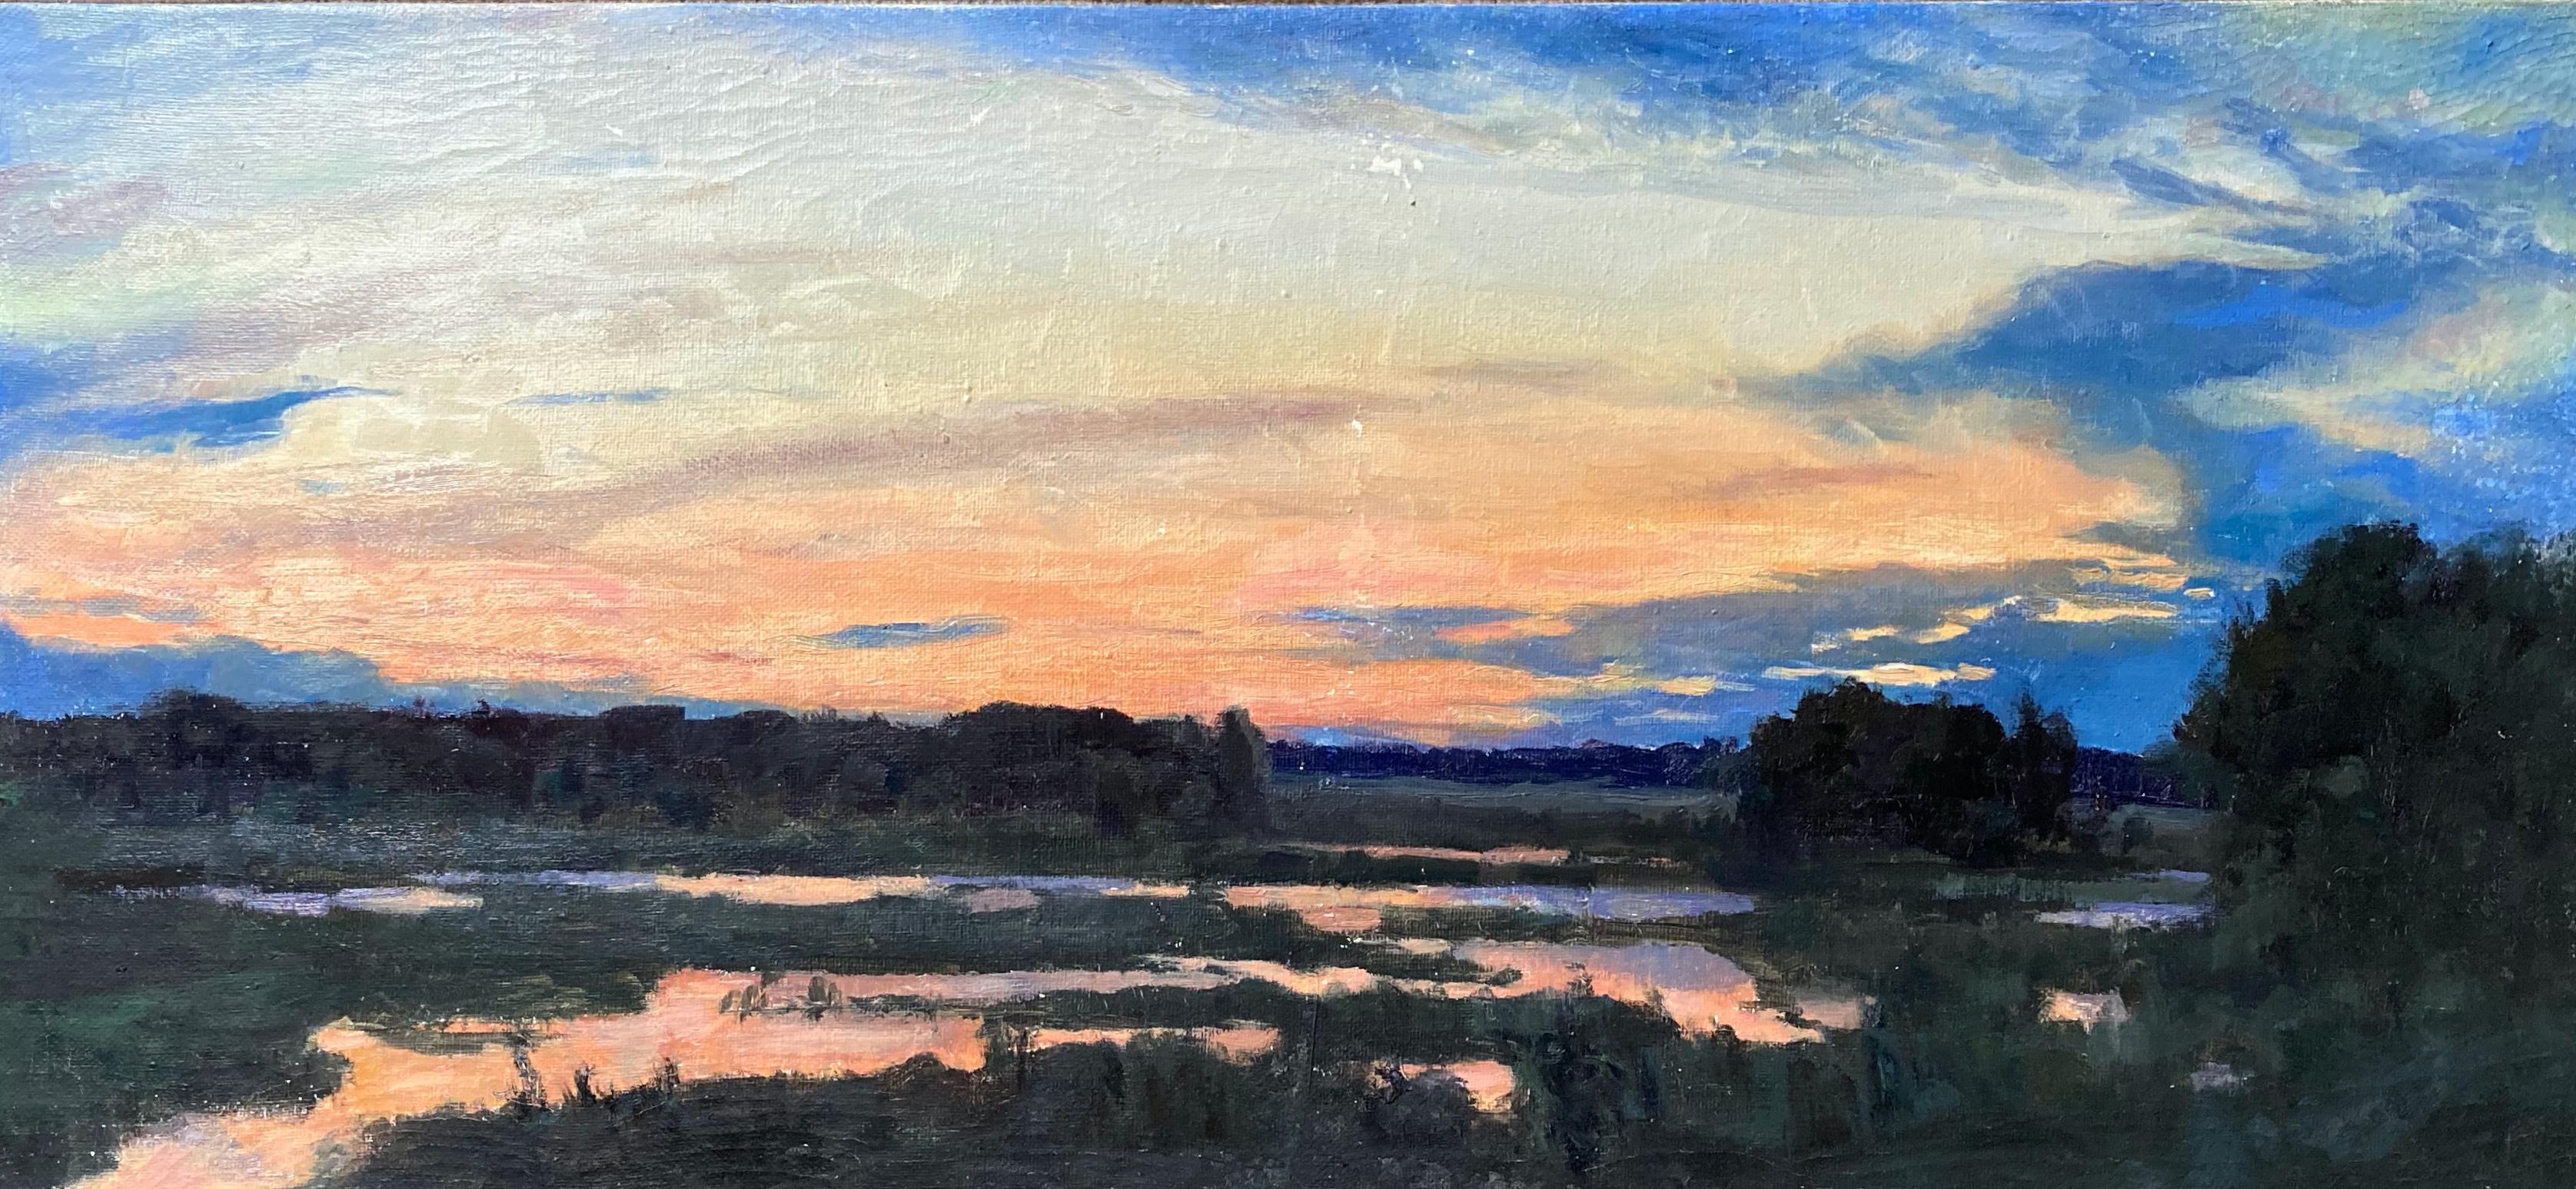 A stunning and evocative sunset scene that I acquired back when I had my gallery on Magazine Street and was buying and selling a lot of art from Ukraine. As you can see in the photo, this painting is both signed and titled, but as I can't ready